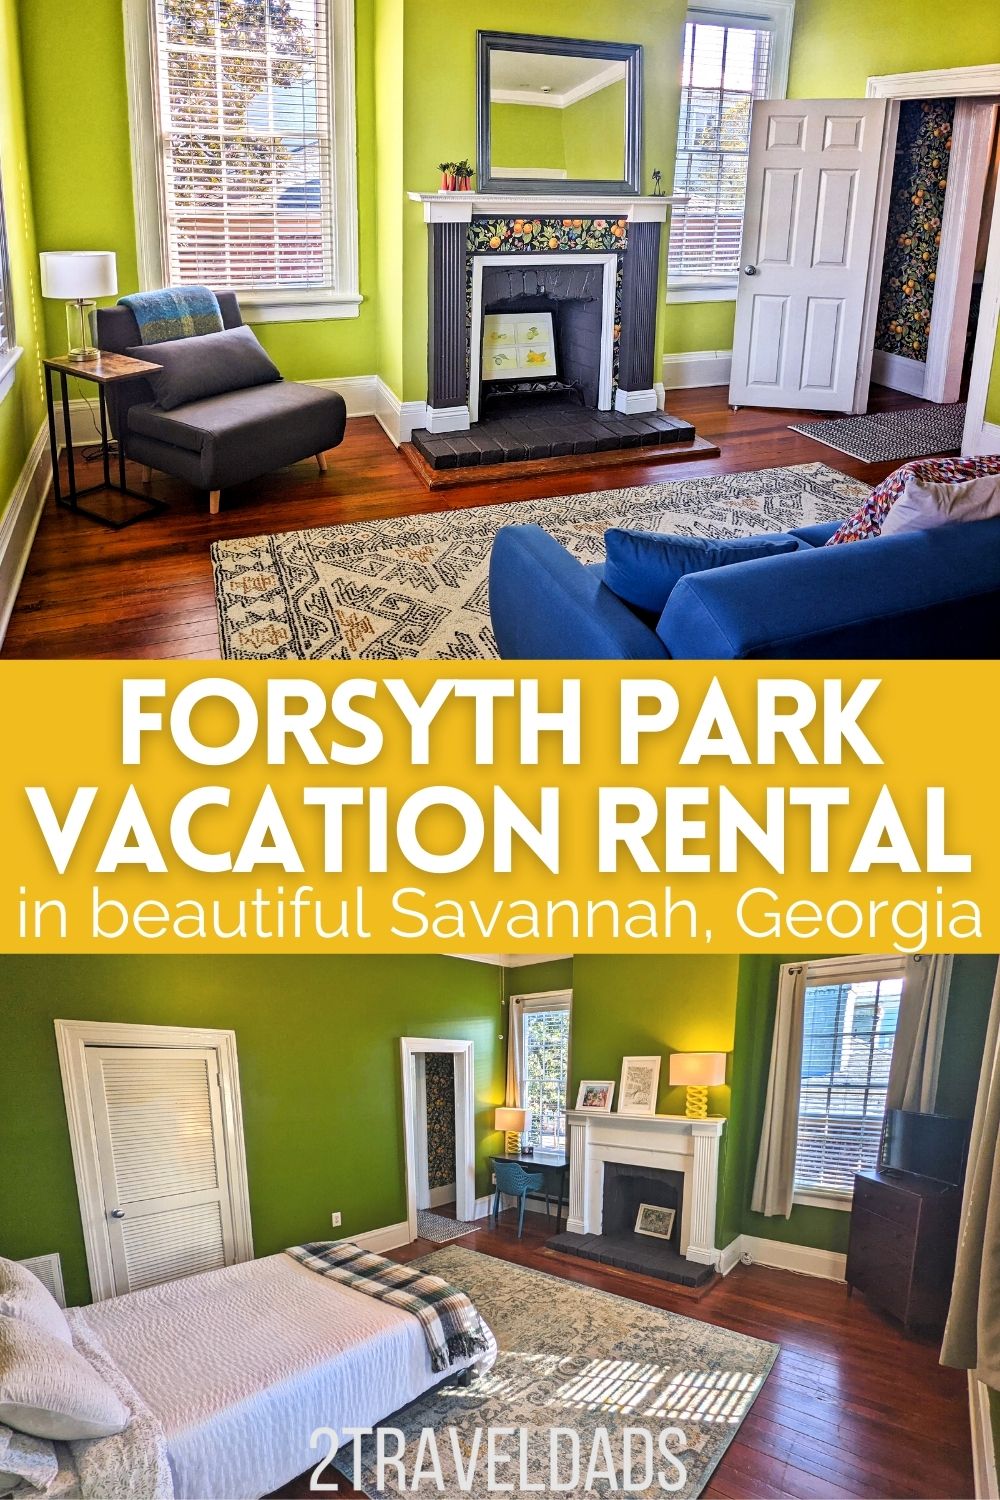 This charming vacation rental near Forsyth Park in Savannah is ideal for a couple looking to enjoy a quiet escape to Savannah. Set in the Victorian District West, the Forsyth Flat is one block off the park, near cafes, restaurants, and walking distance to the whole historic district to the waterfront.